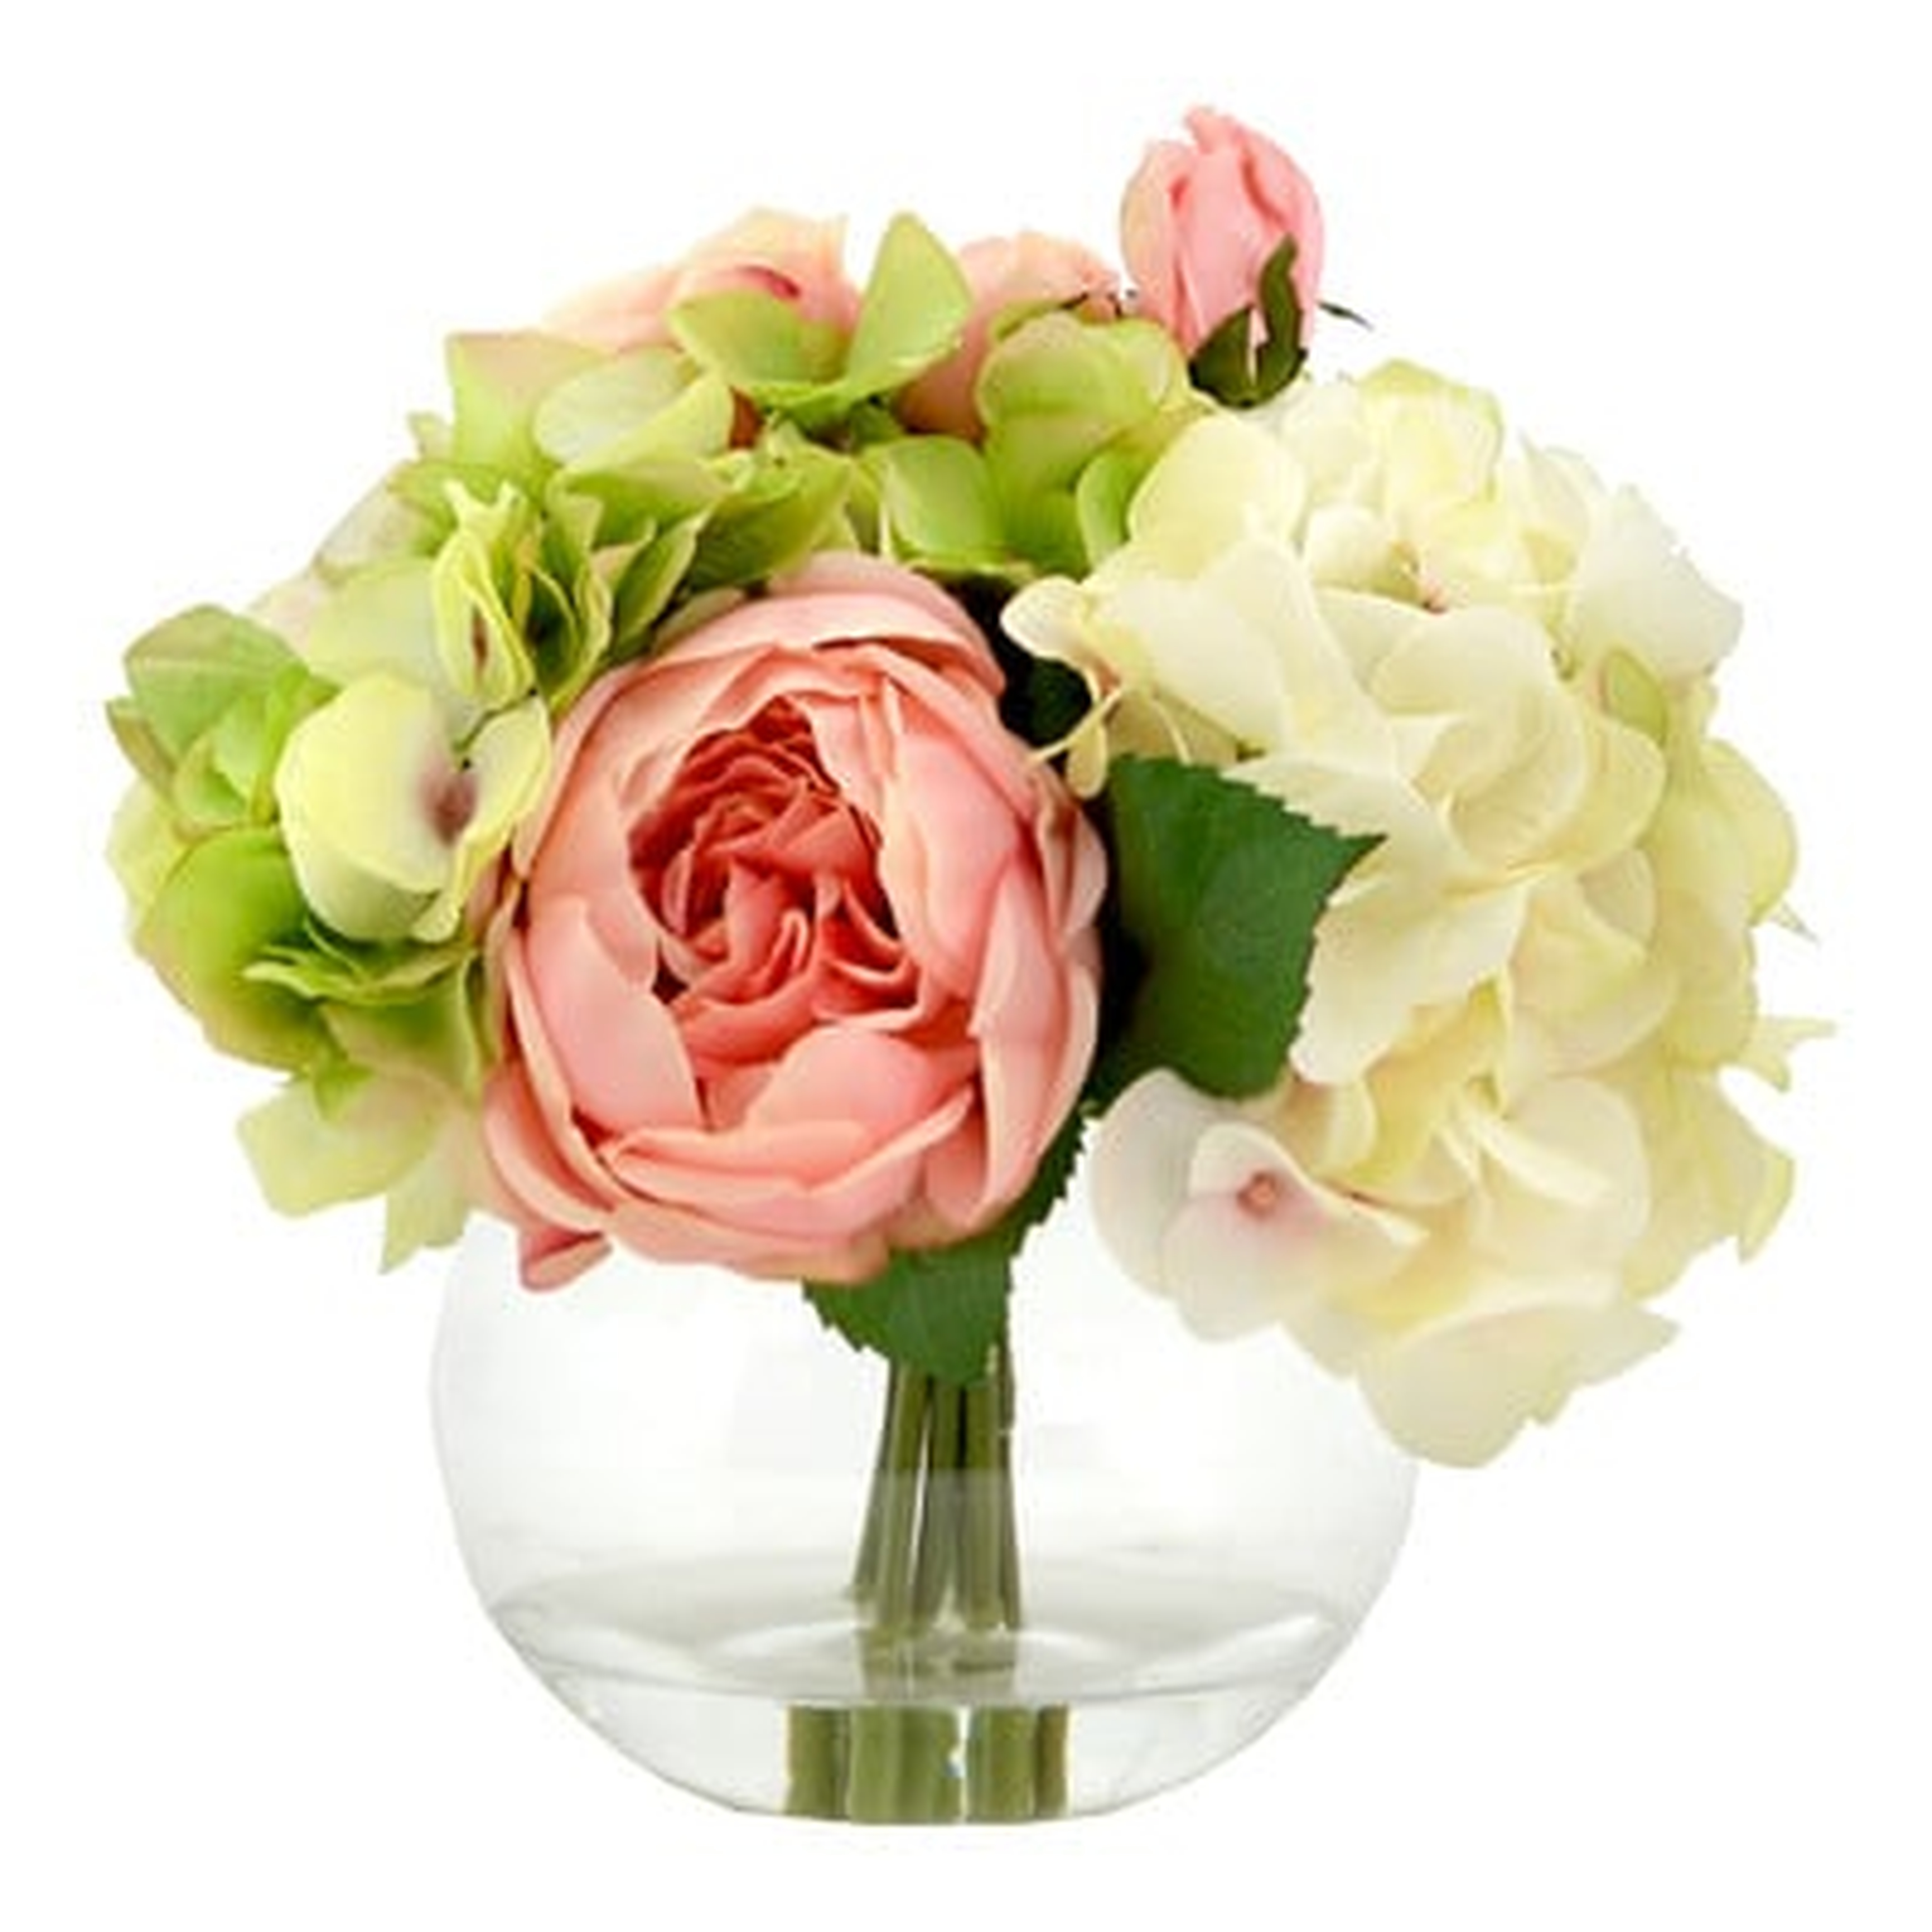 Faux Mixed Bouquet of Peony, Hydrangea and Roses - Birch Lane